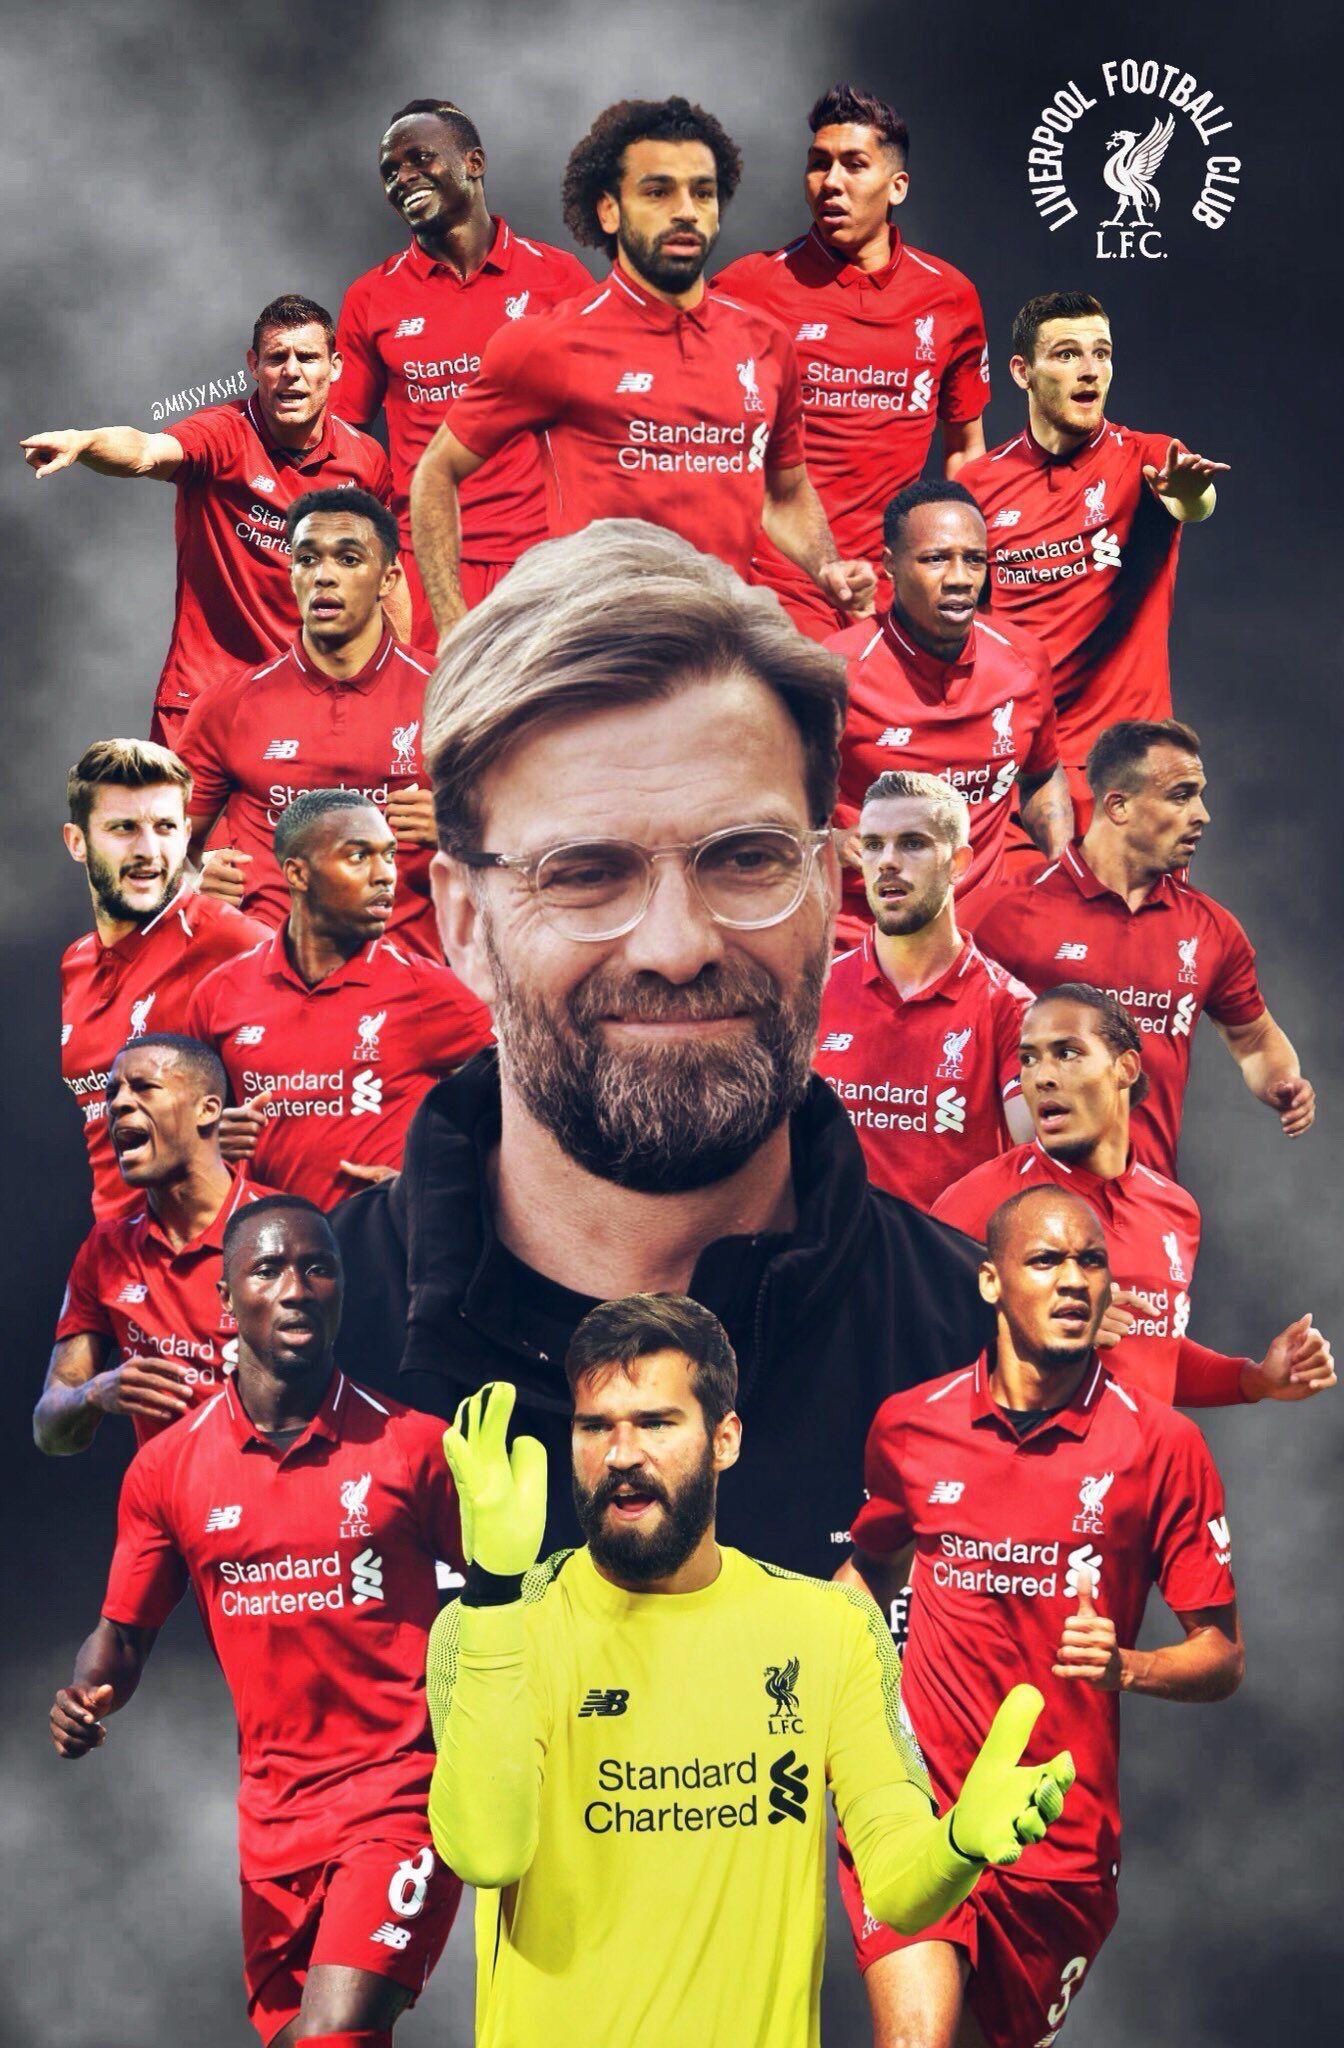 Liverpool Wallpaper New HD For 2020 - Free download and software reviews -  CNET Download